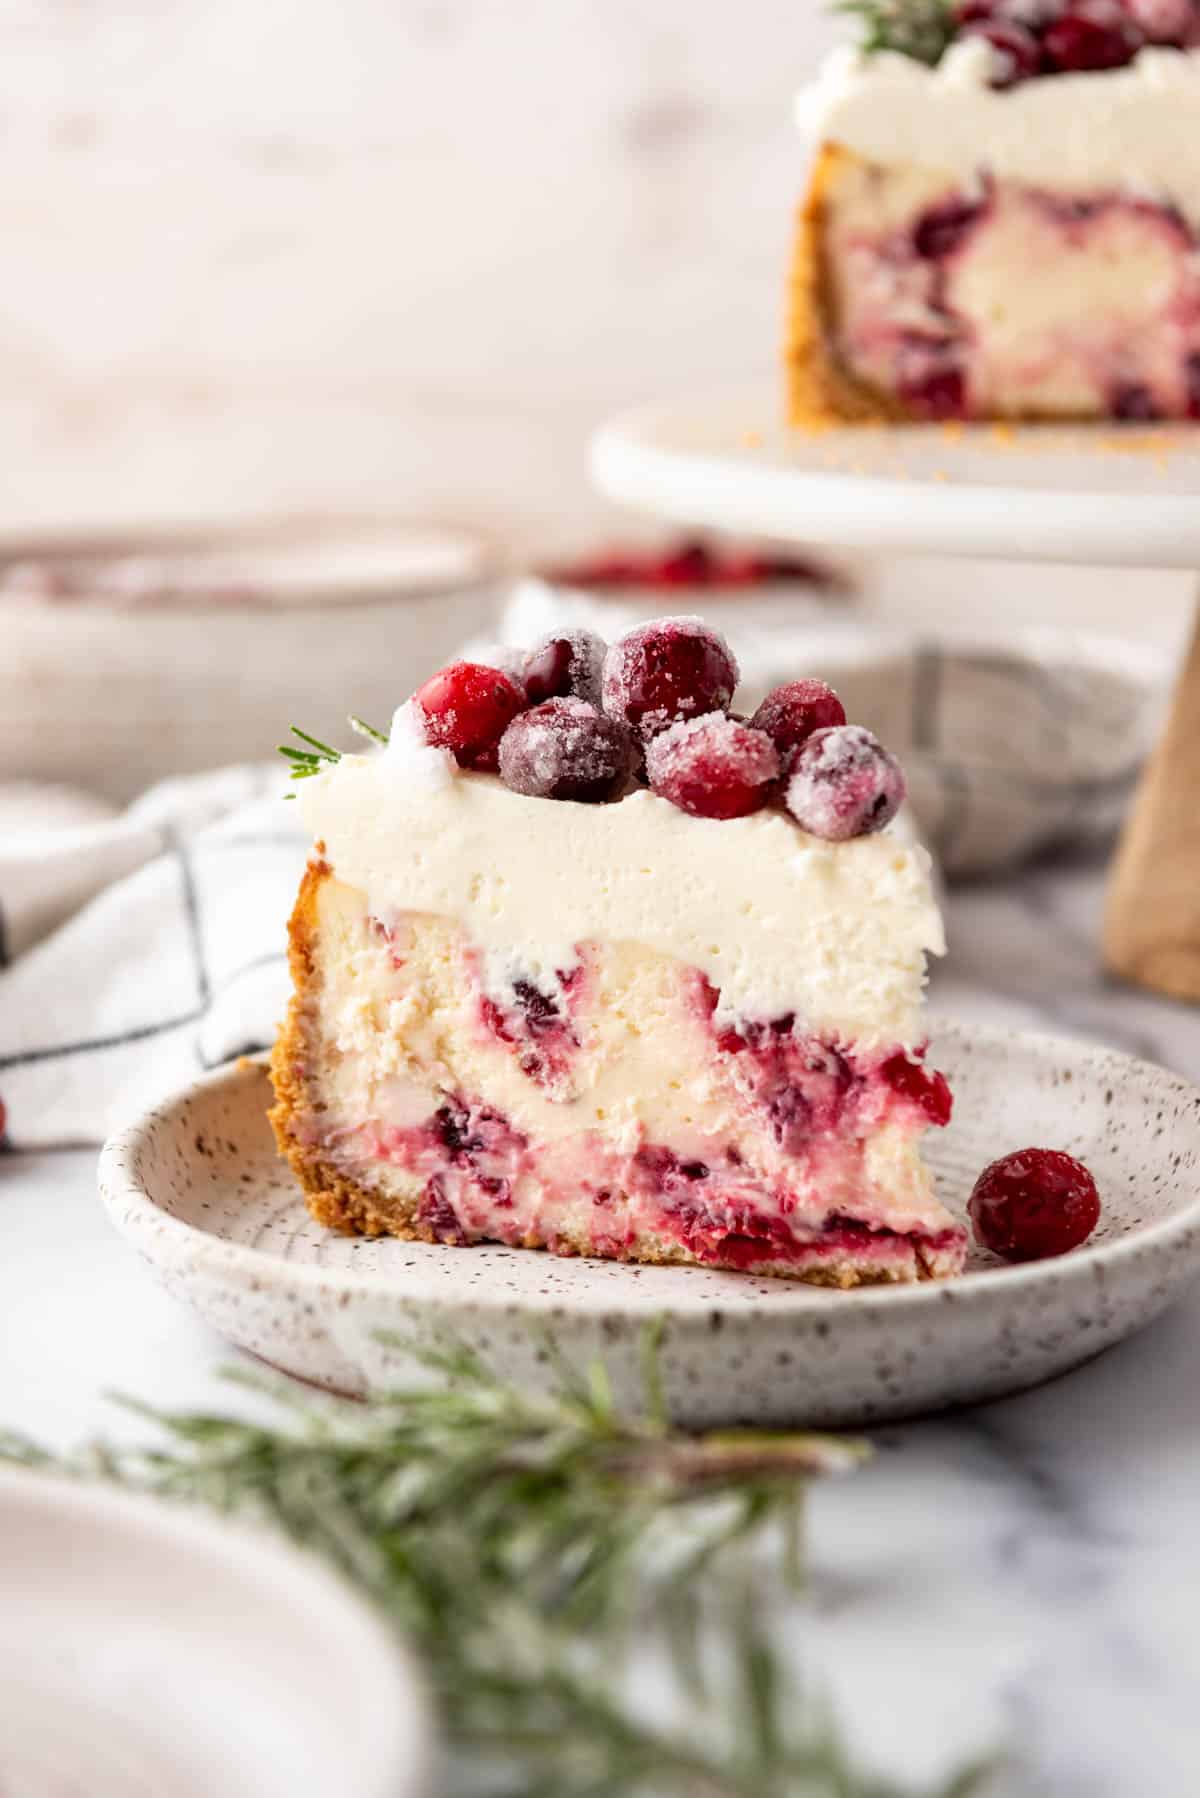 An image of a slice of cranberry cheesecake on a plate.